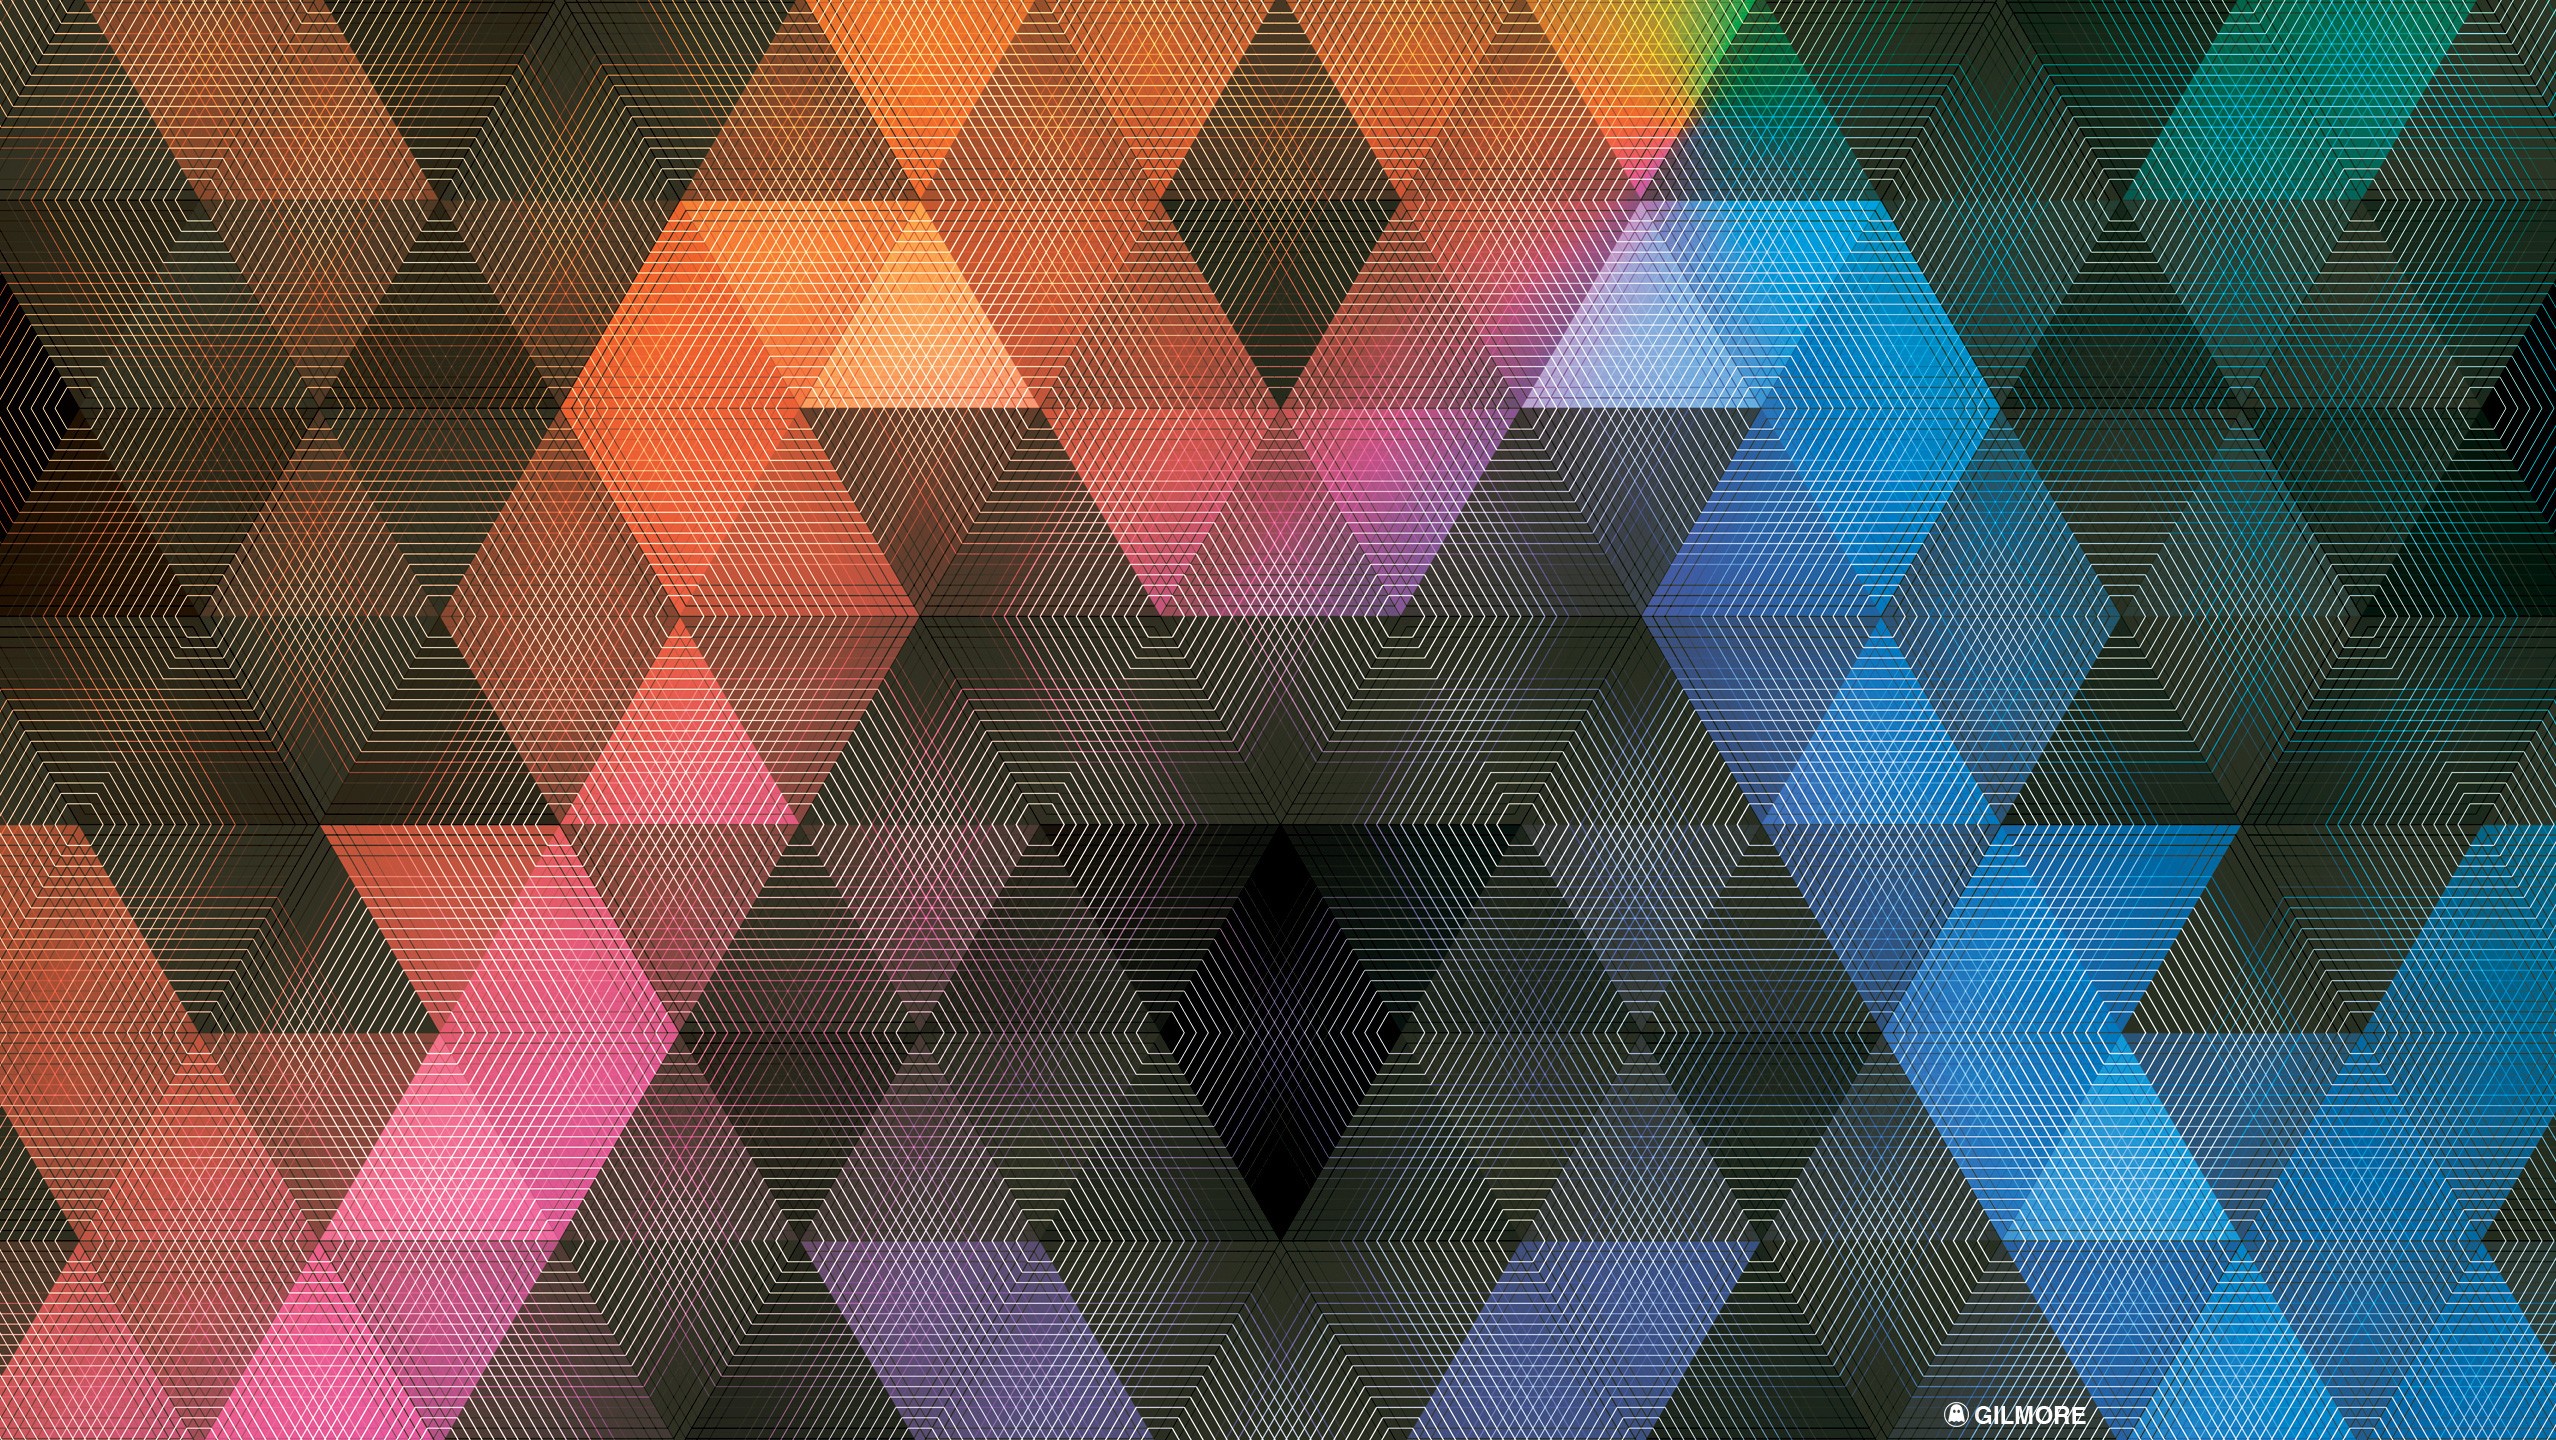 abstract, Pattern, Andy Gilmore, Geometry, Colorful Wallpaper